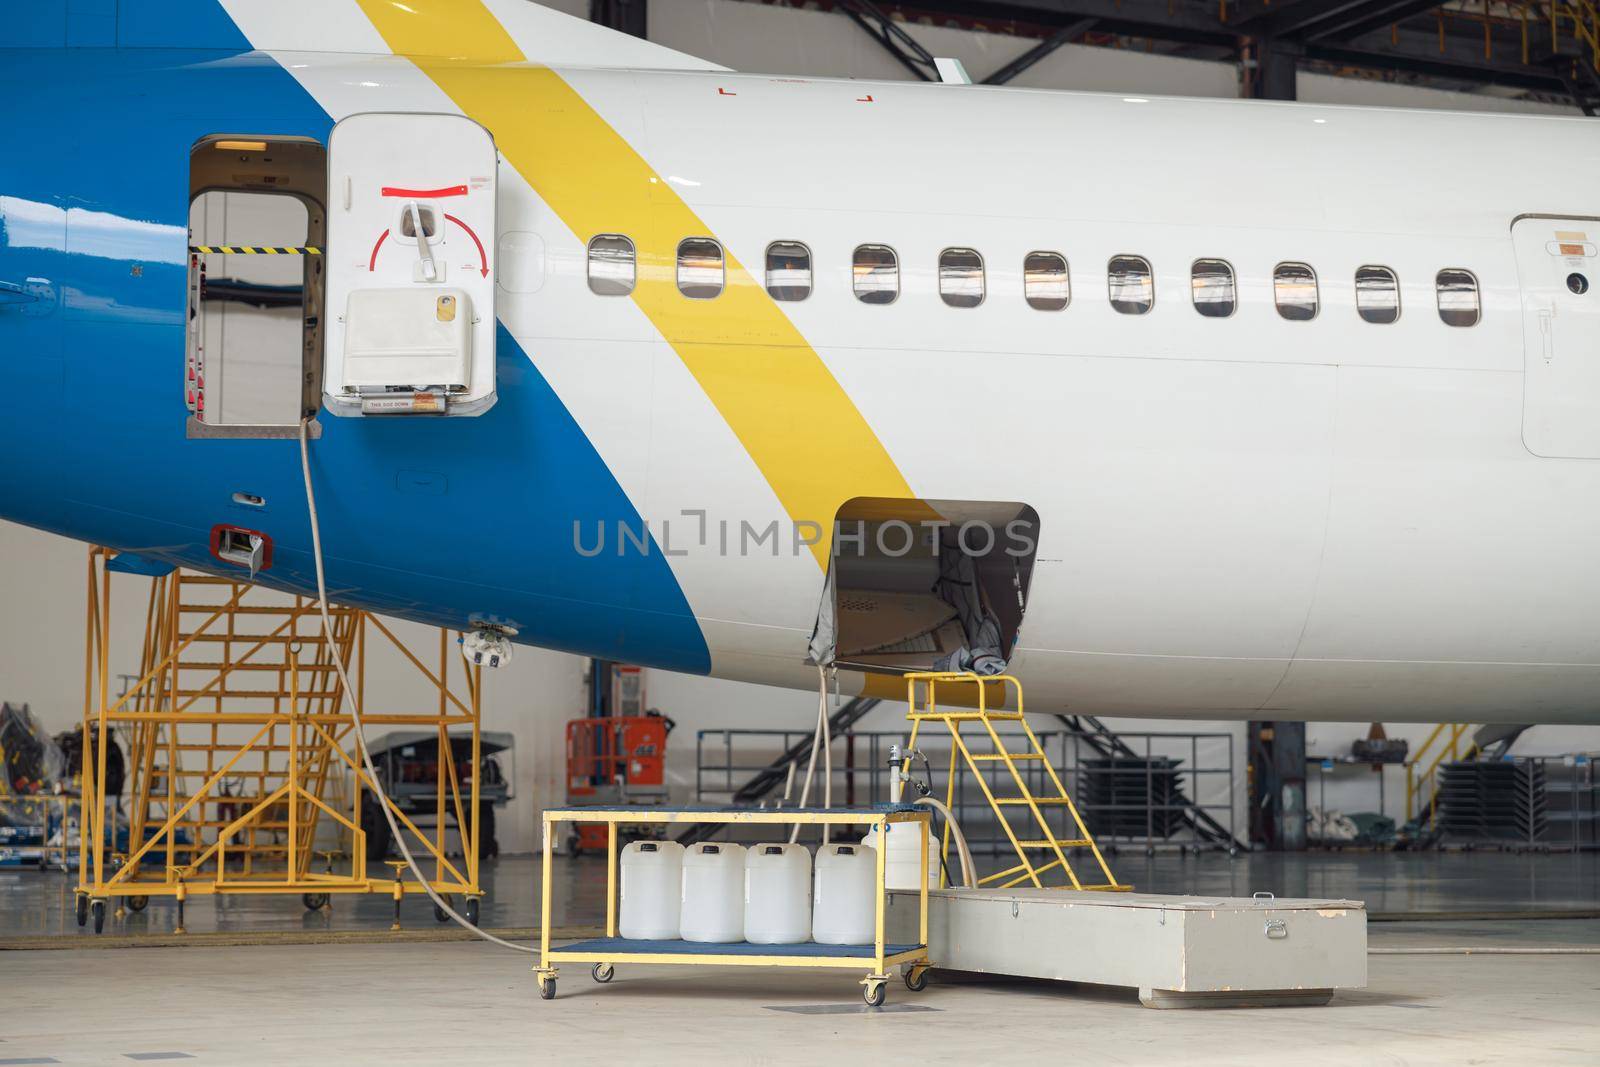 Passenger airplane on maintenance repair in airport hangar indoors in the daytime. Aircraft. Plane, shipping, transportation concept